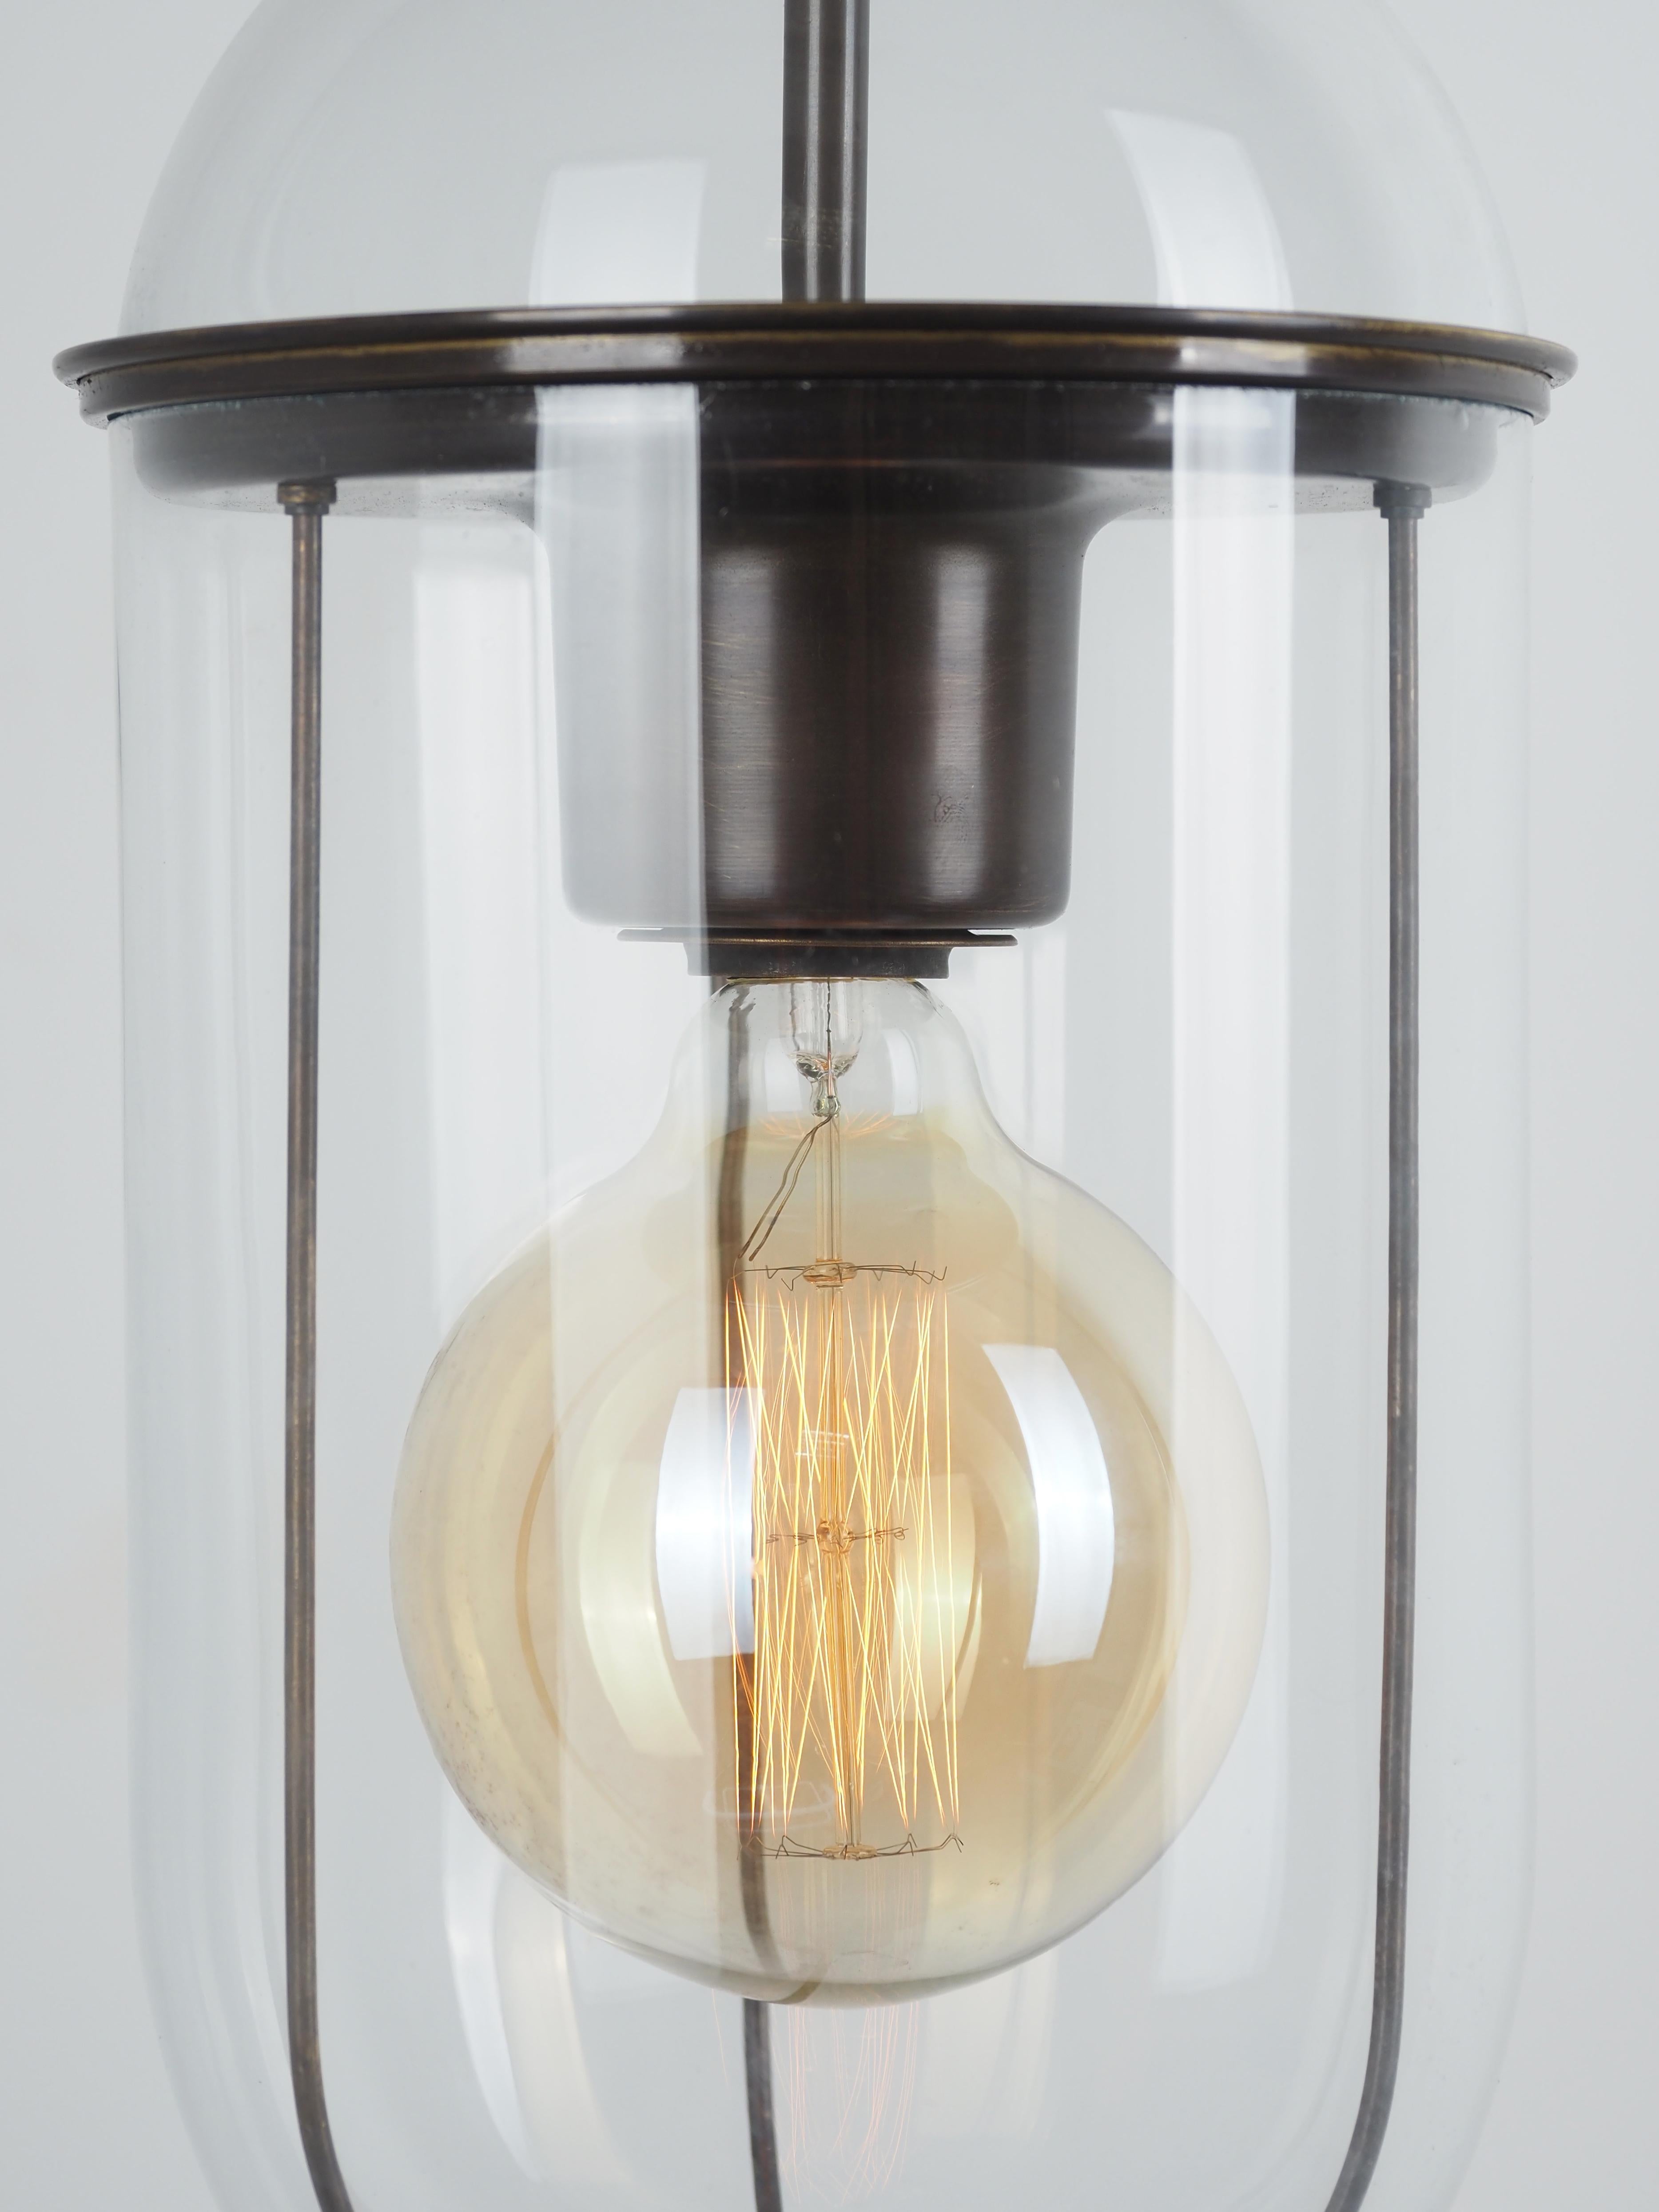 Contemporary Italian elongated shape pair of clear glass pendent lights. 
Two pieces of glass separated by a horizontal ring which holds the single light socket.
A bronze cage lines the interior.
Lower piece of glass twists off for easy bulb